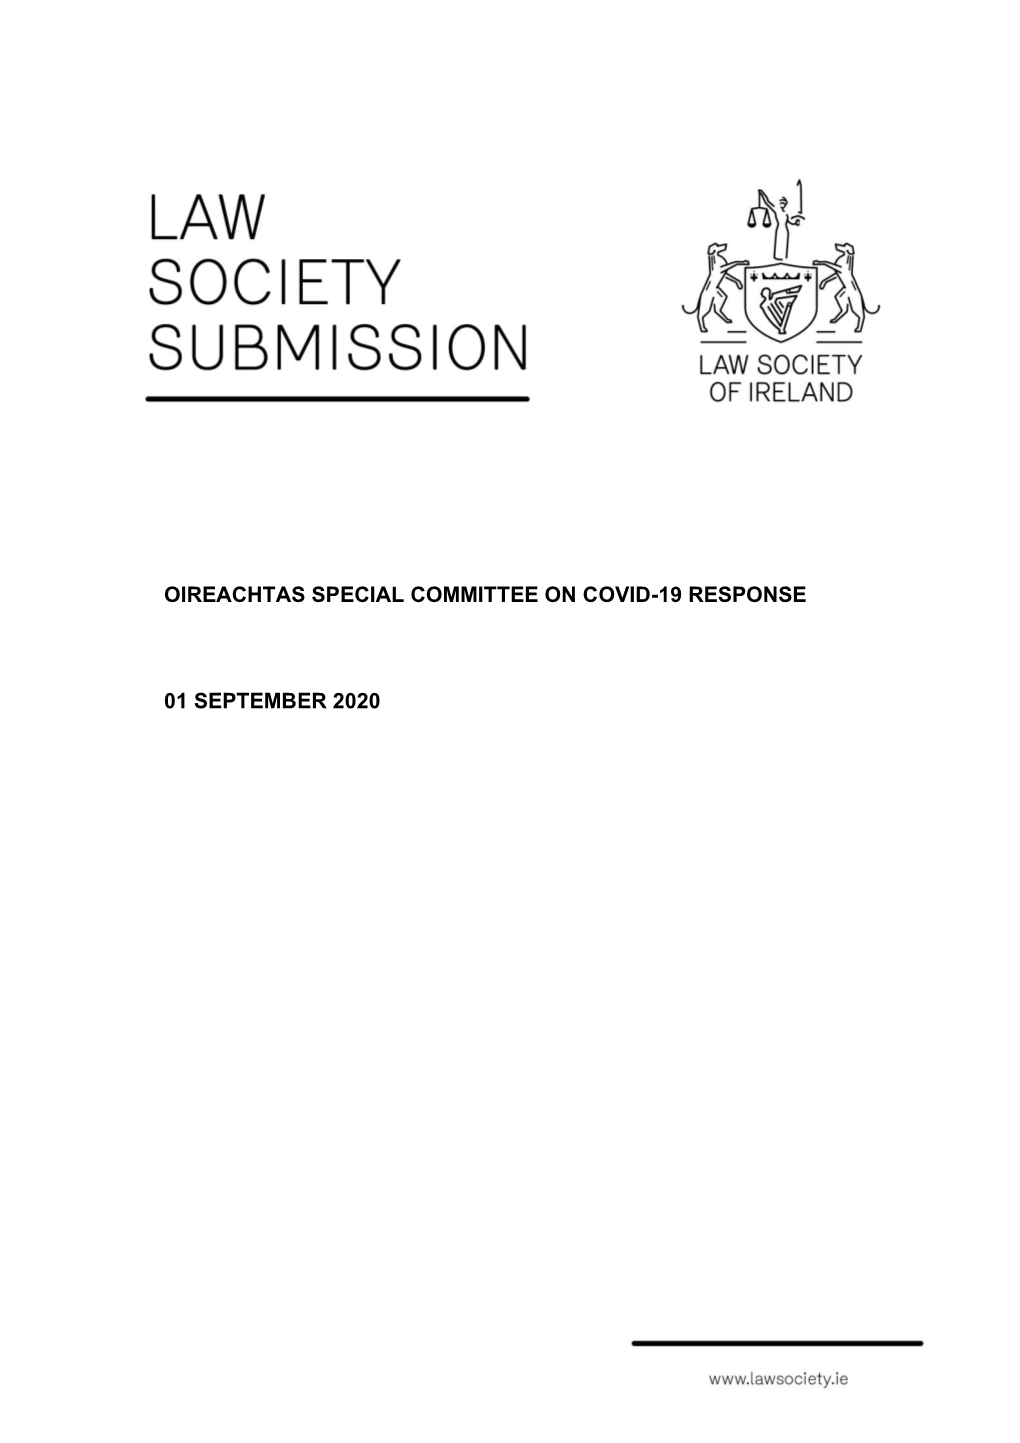 Submission to the Oireachtas Special Committee on Covid-19 Response